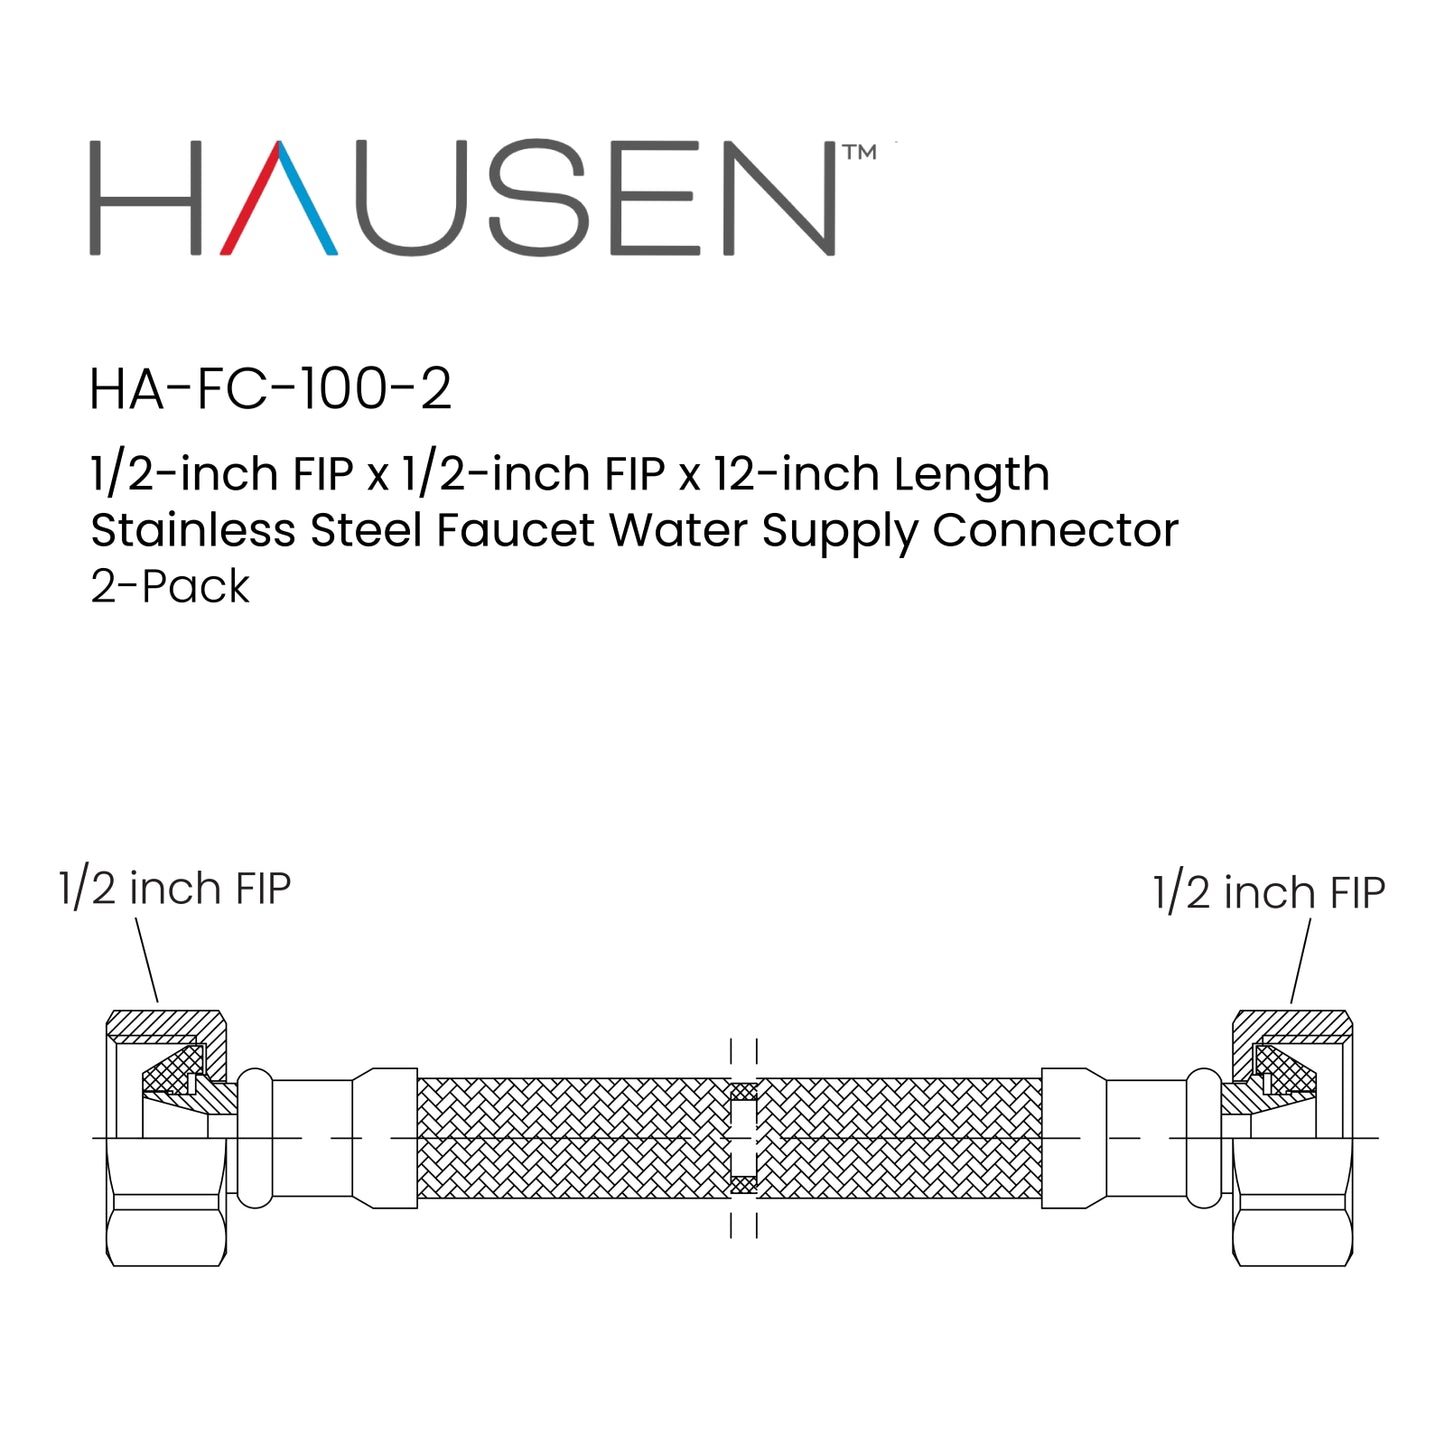 Hausen 1/2-inch FIP x 1/2-inch FIP x 12-inch Length Stainless Steel Faucet Water Supply Connector, 2-Pack